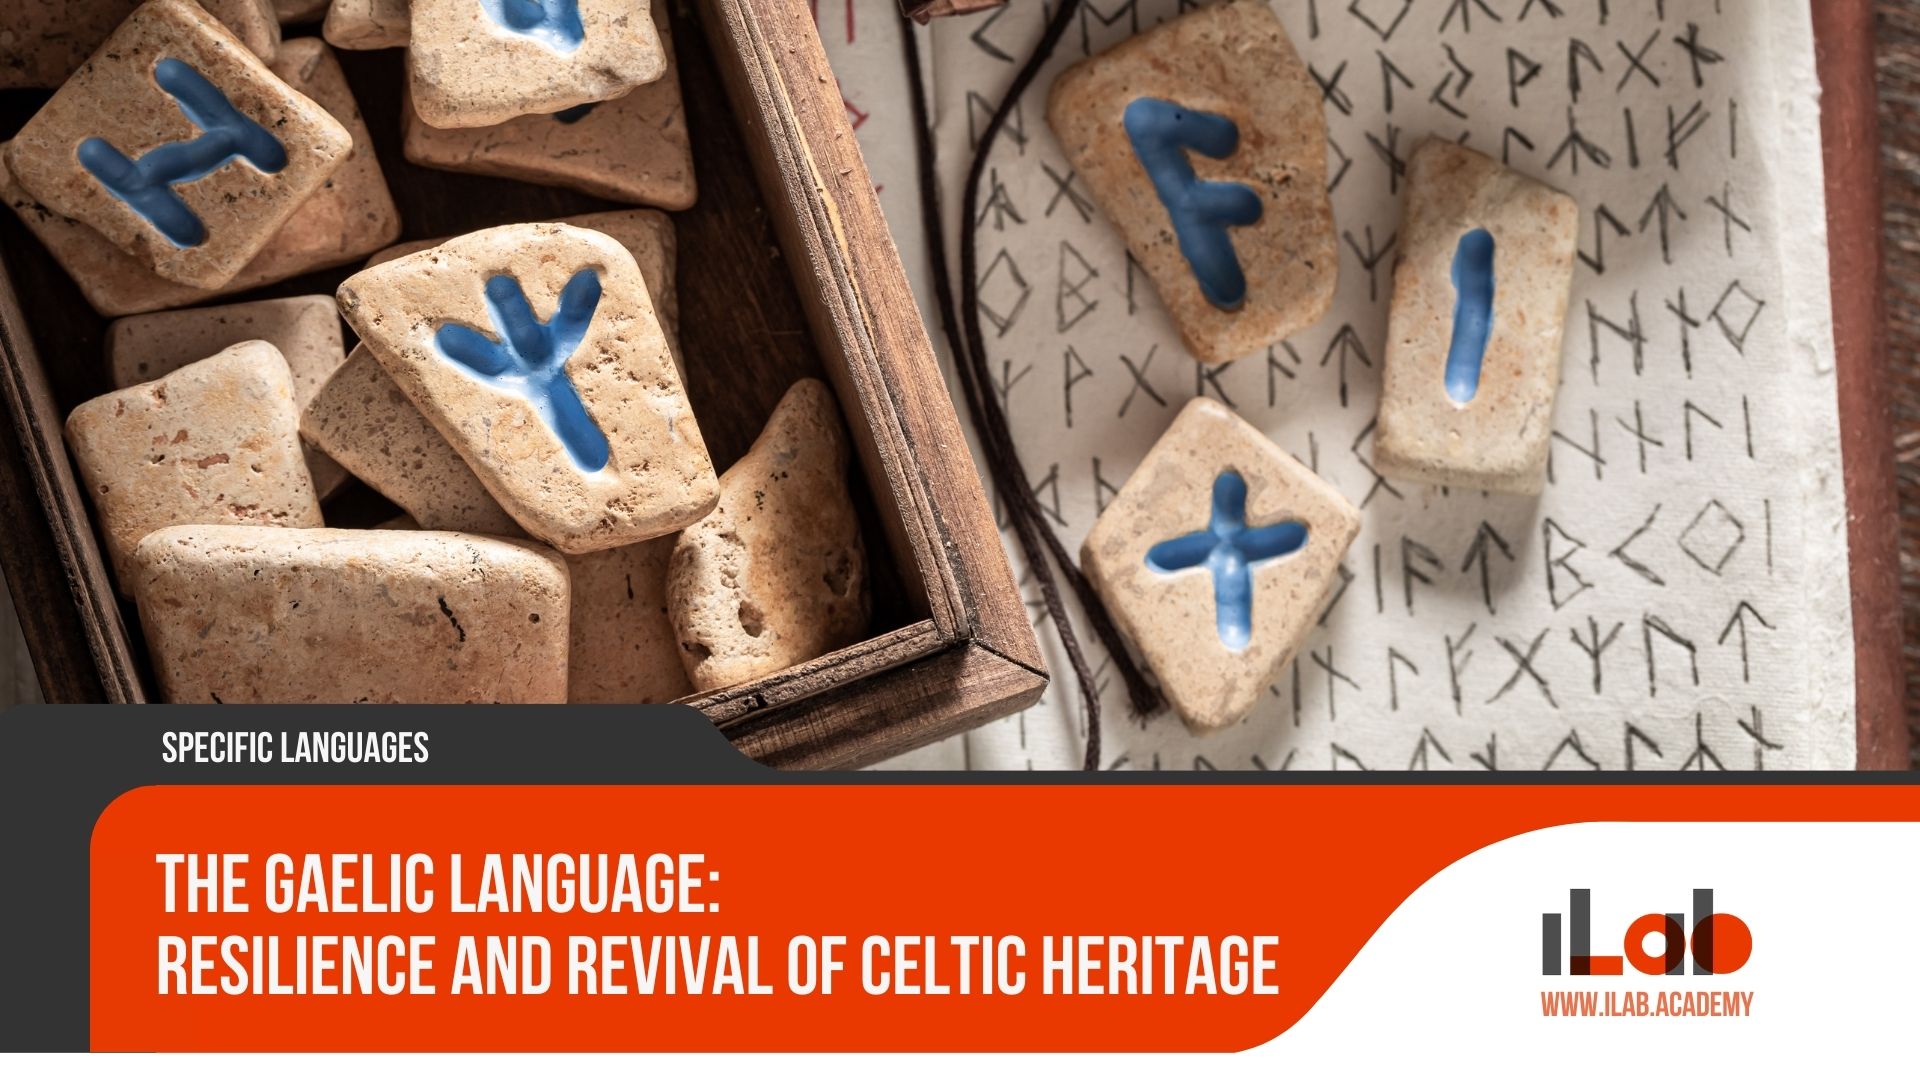 The Gaelic Language: Resilience and Revival of Celtic Heritage